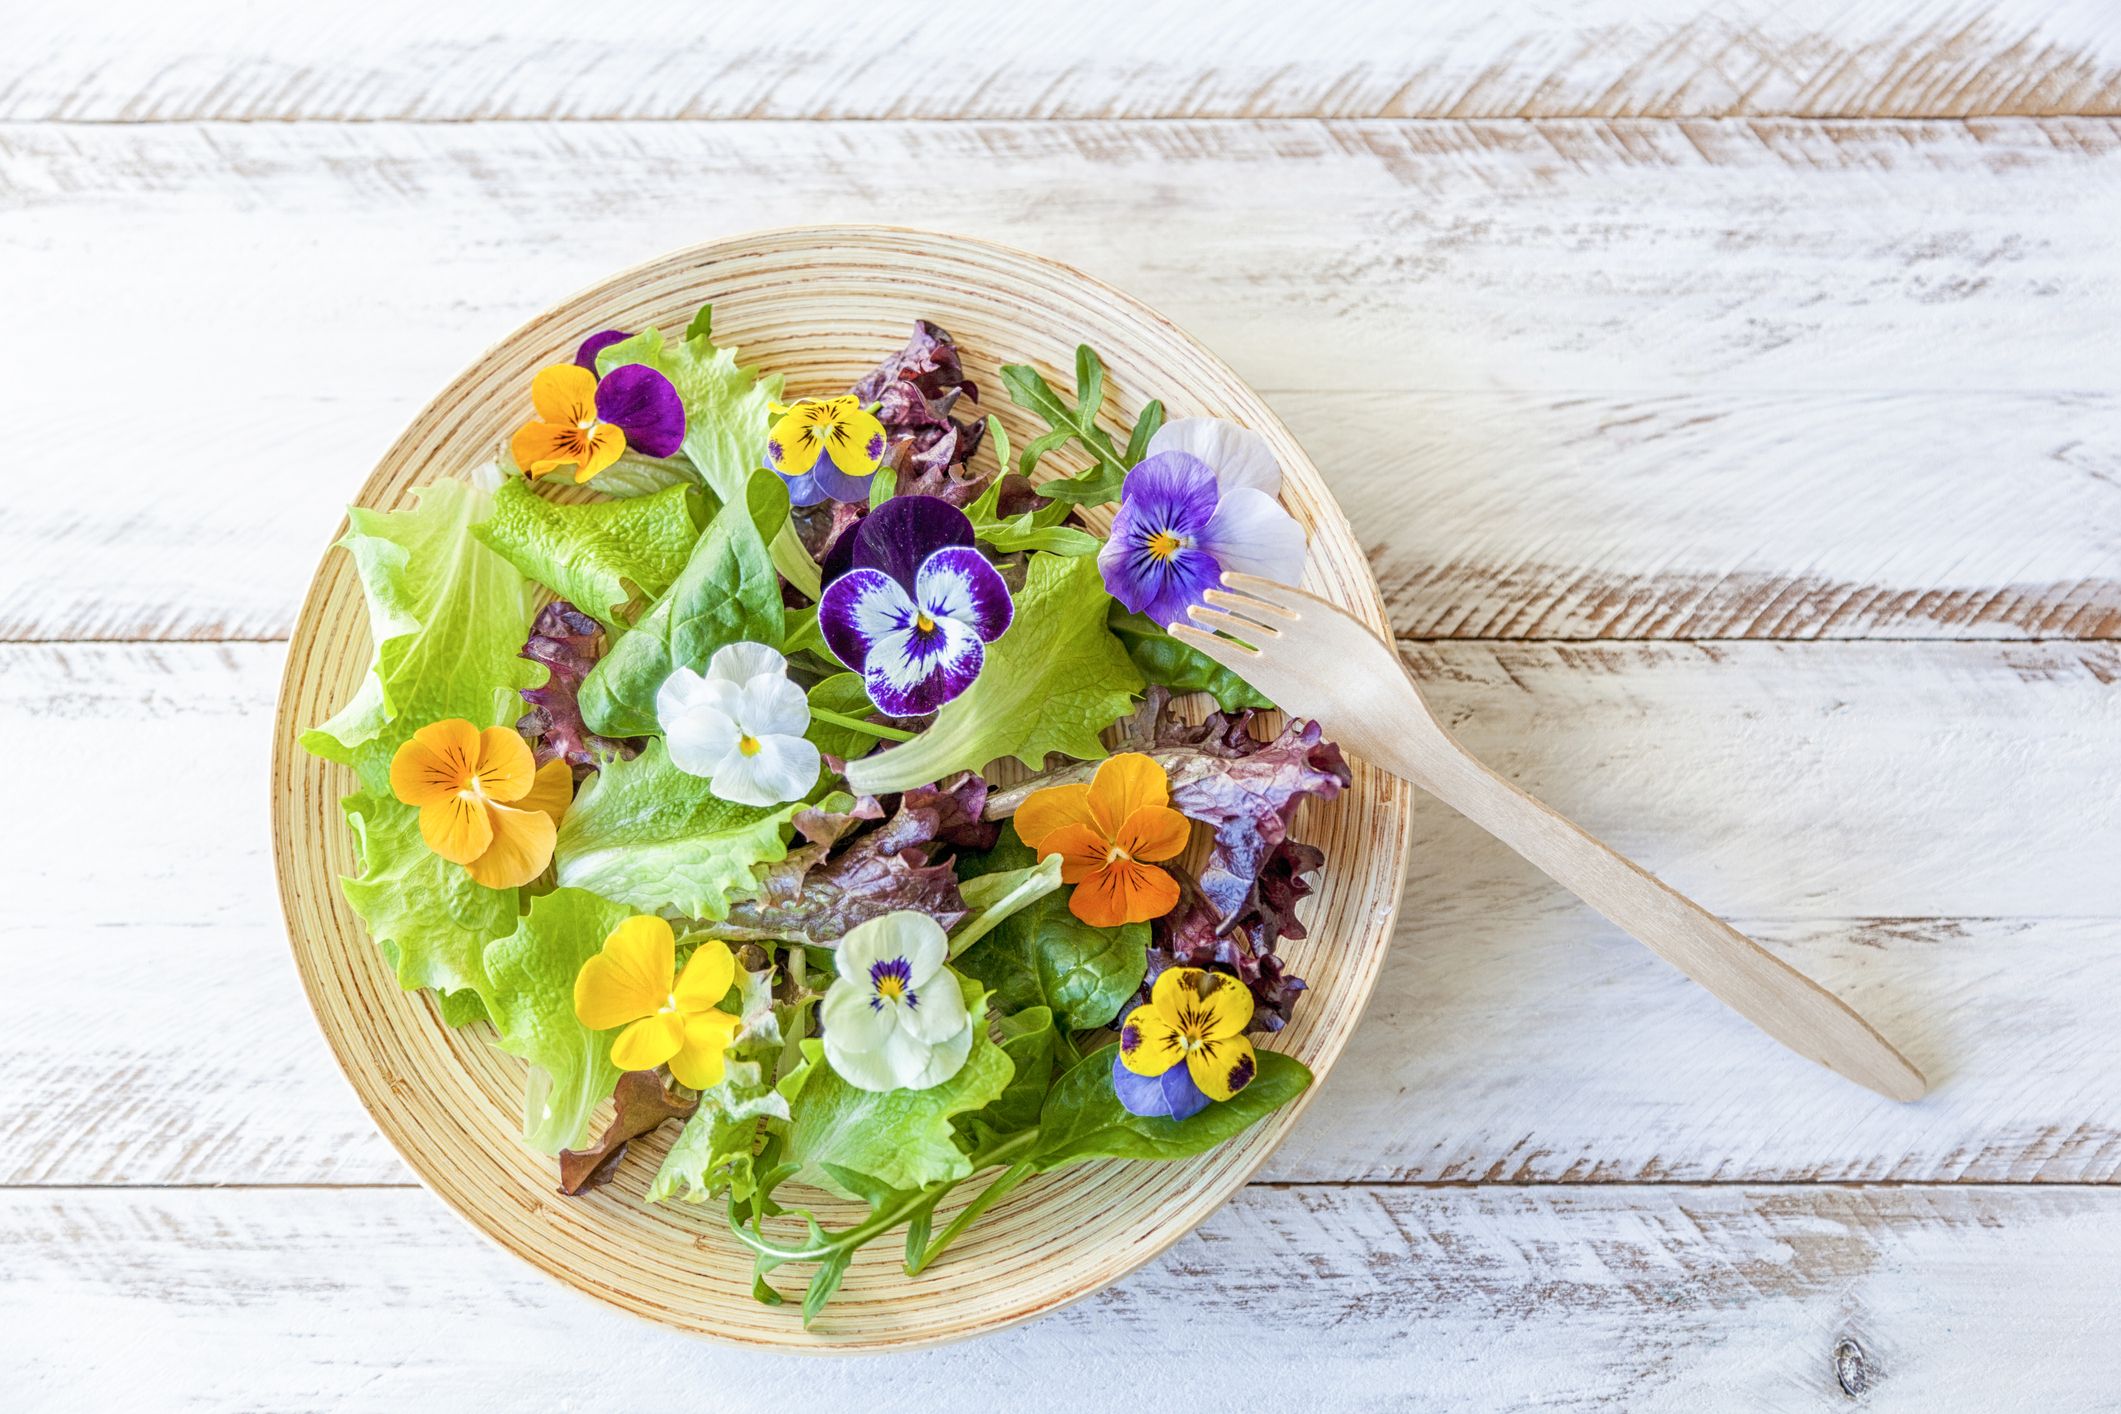 15 Different Types of Edible Flowers - What Flowers Are Edible?